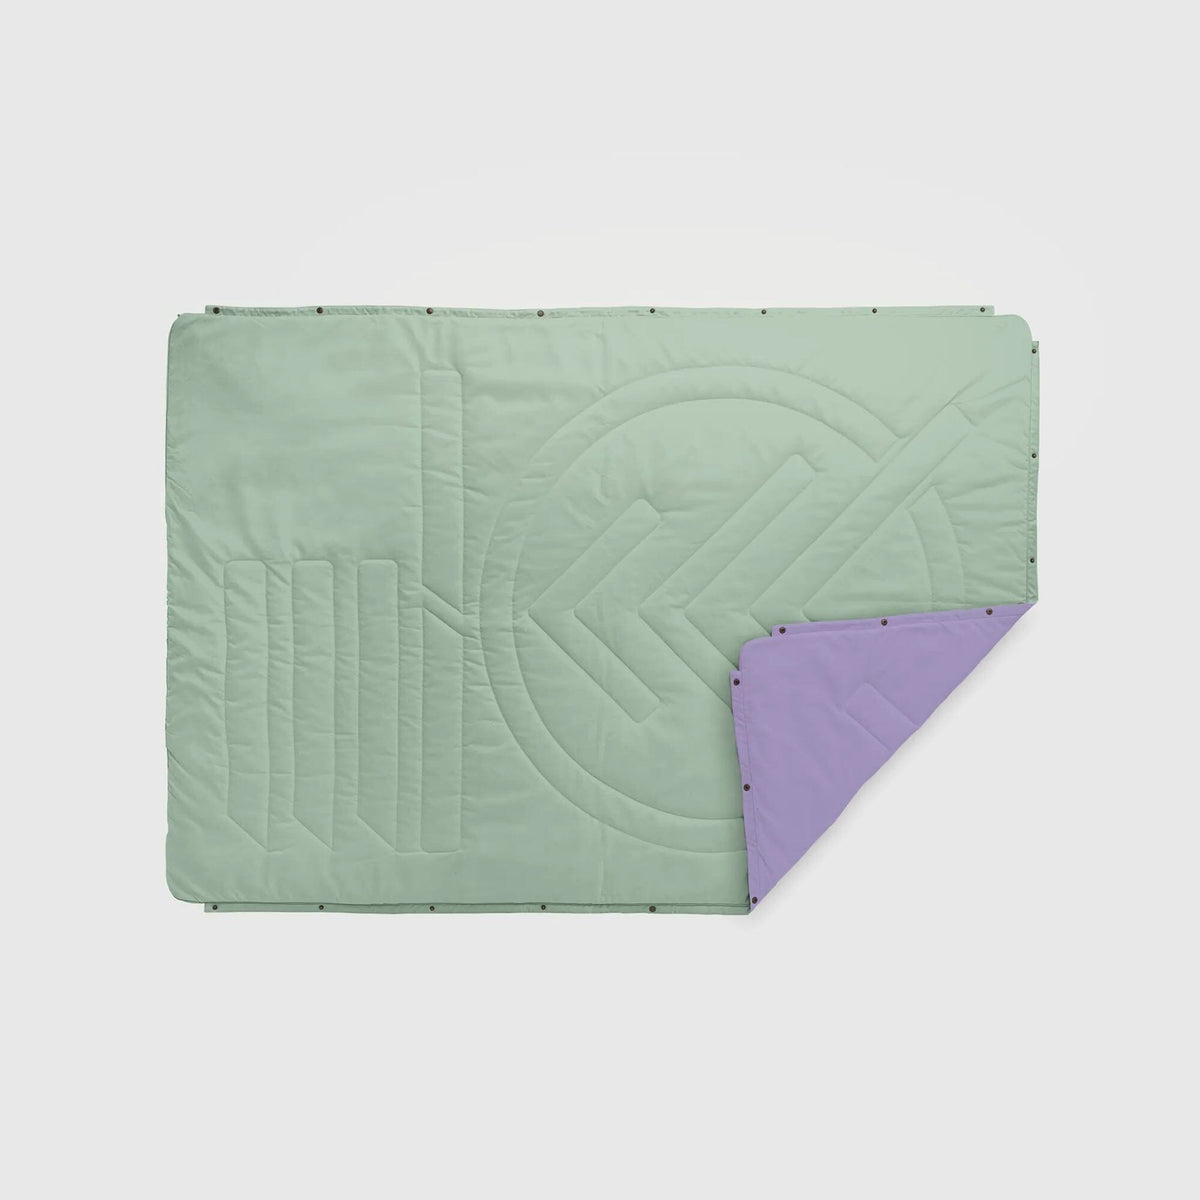 VOITED Recycled Ripstop Outdoor Camping Blanket - Cameo Green/Digital Lavender Blankets VOITED 